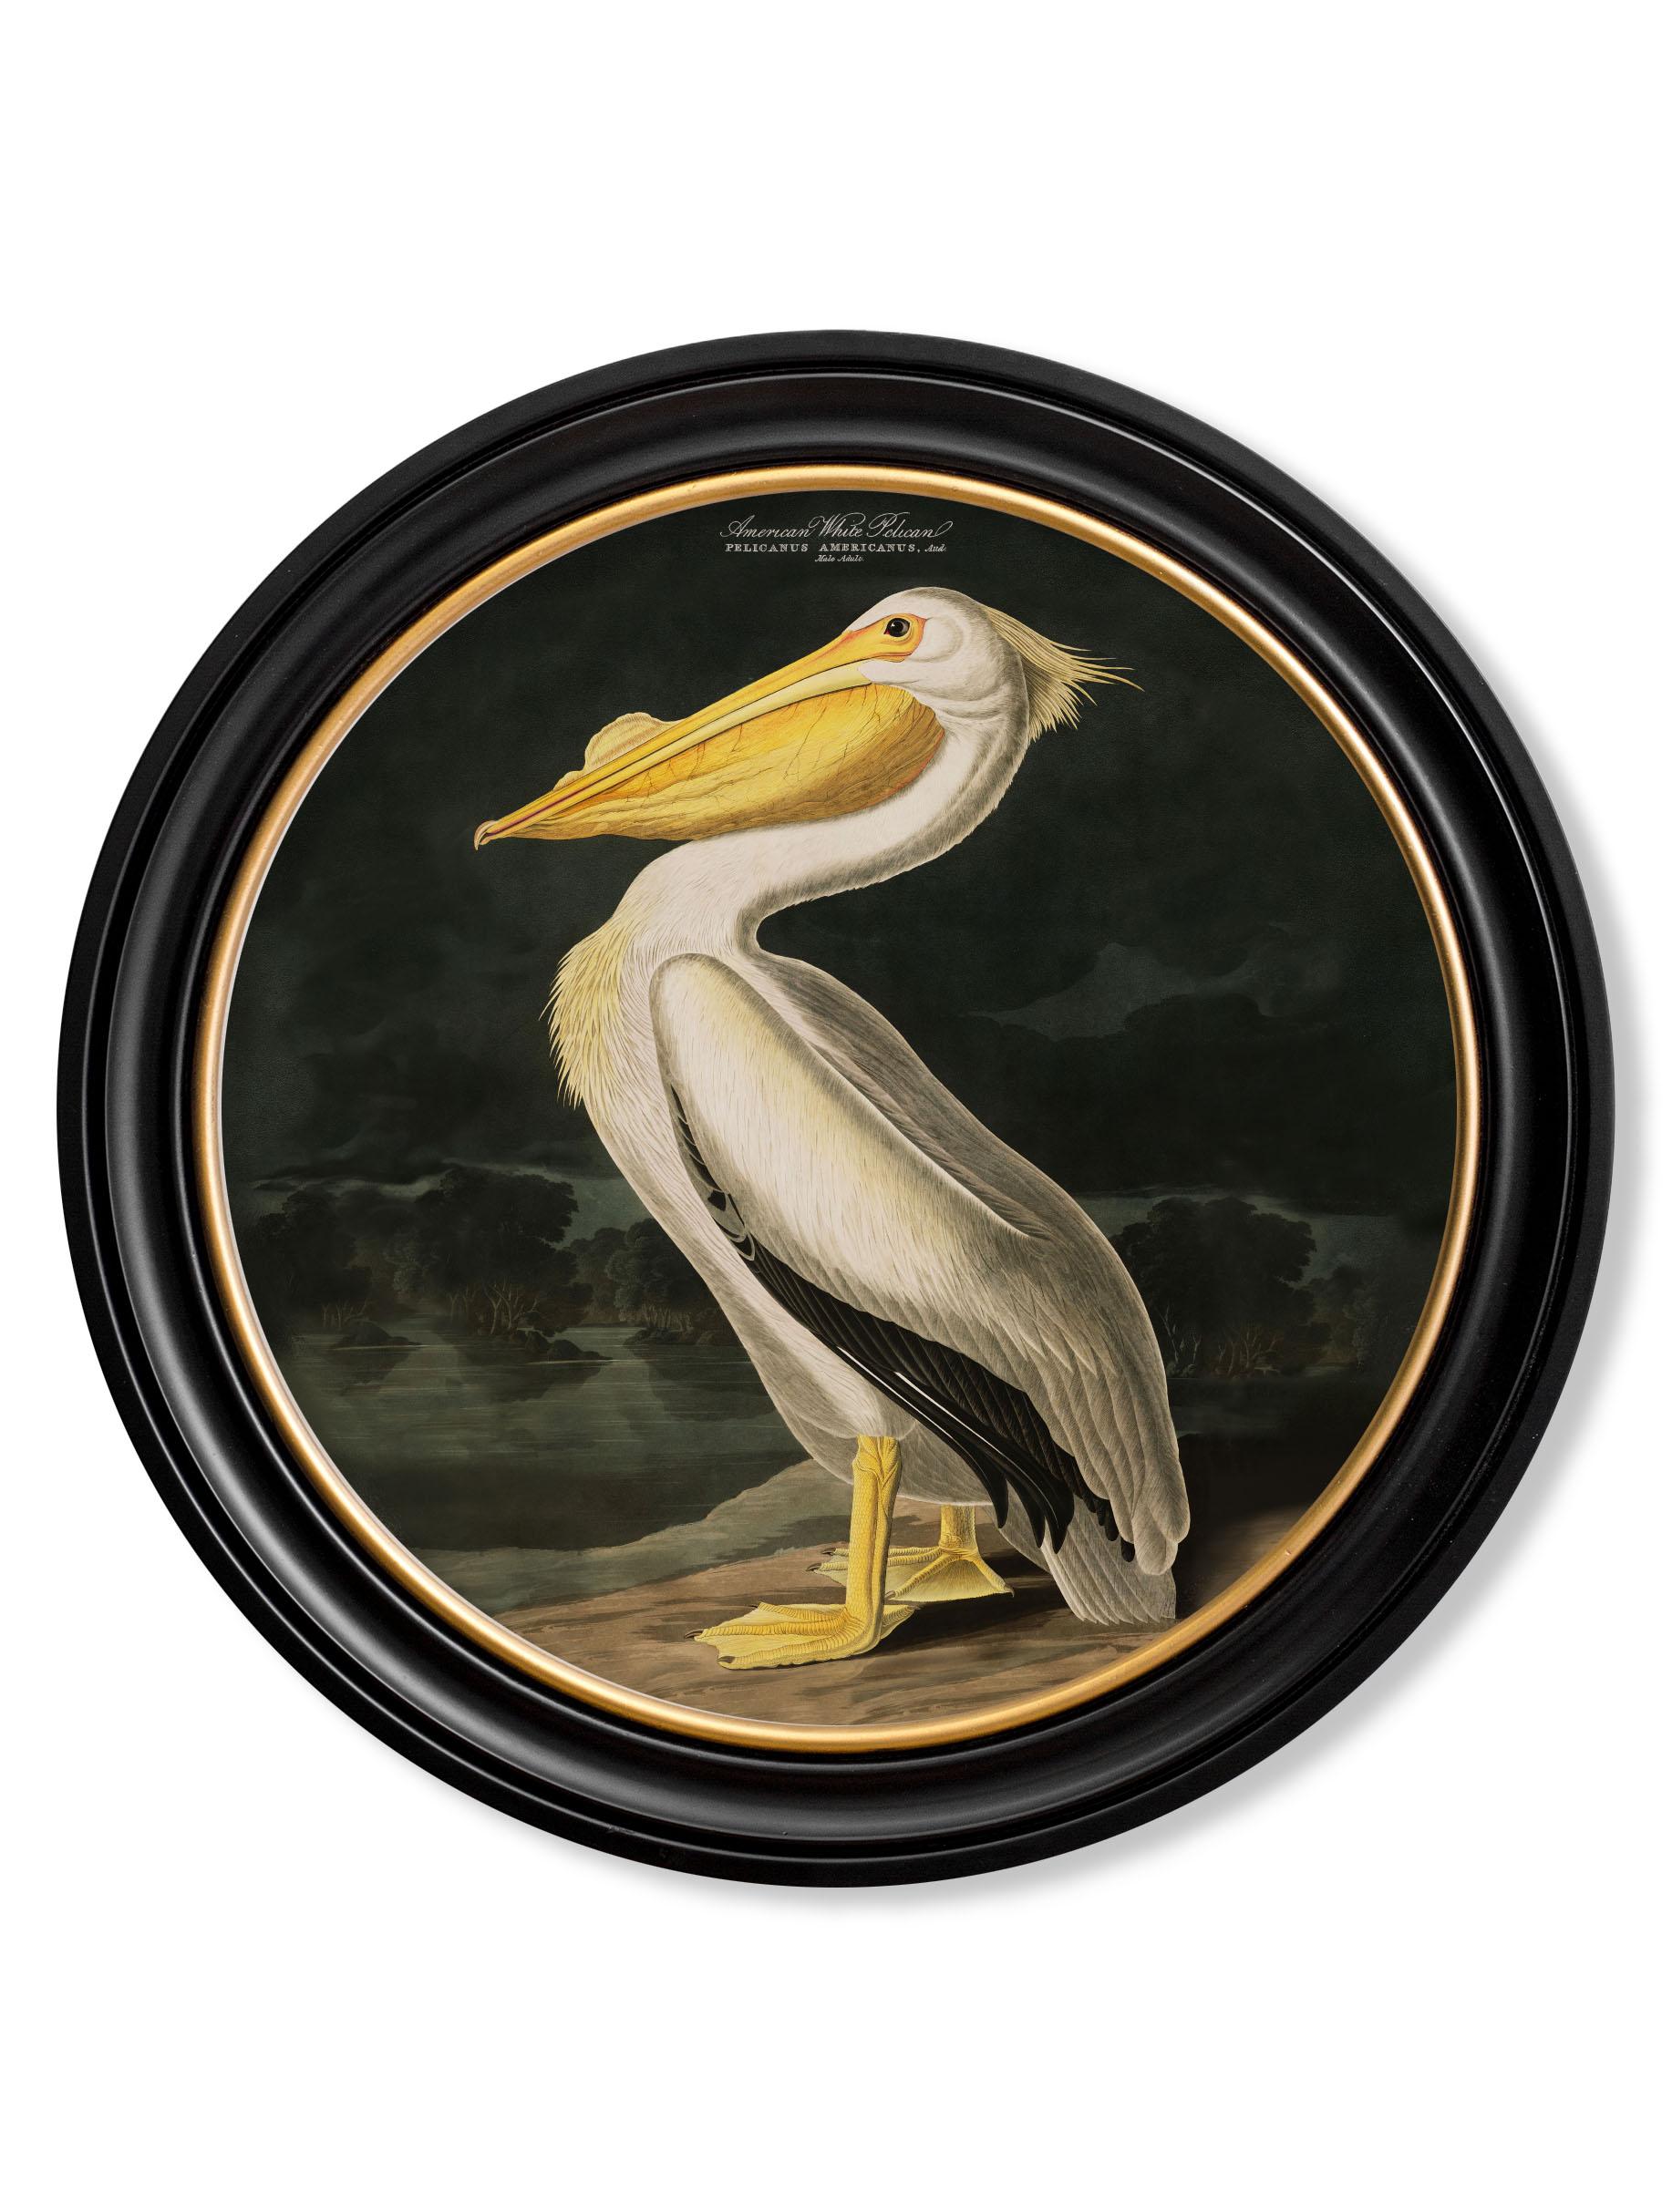 This is a digitally remastered print of the American White Pelican referenced from an Audubon Birds of America hand coloured print, originally from the 1800's.

The American white pelican is a large aquatic soaring bird, which breeds in interior